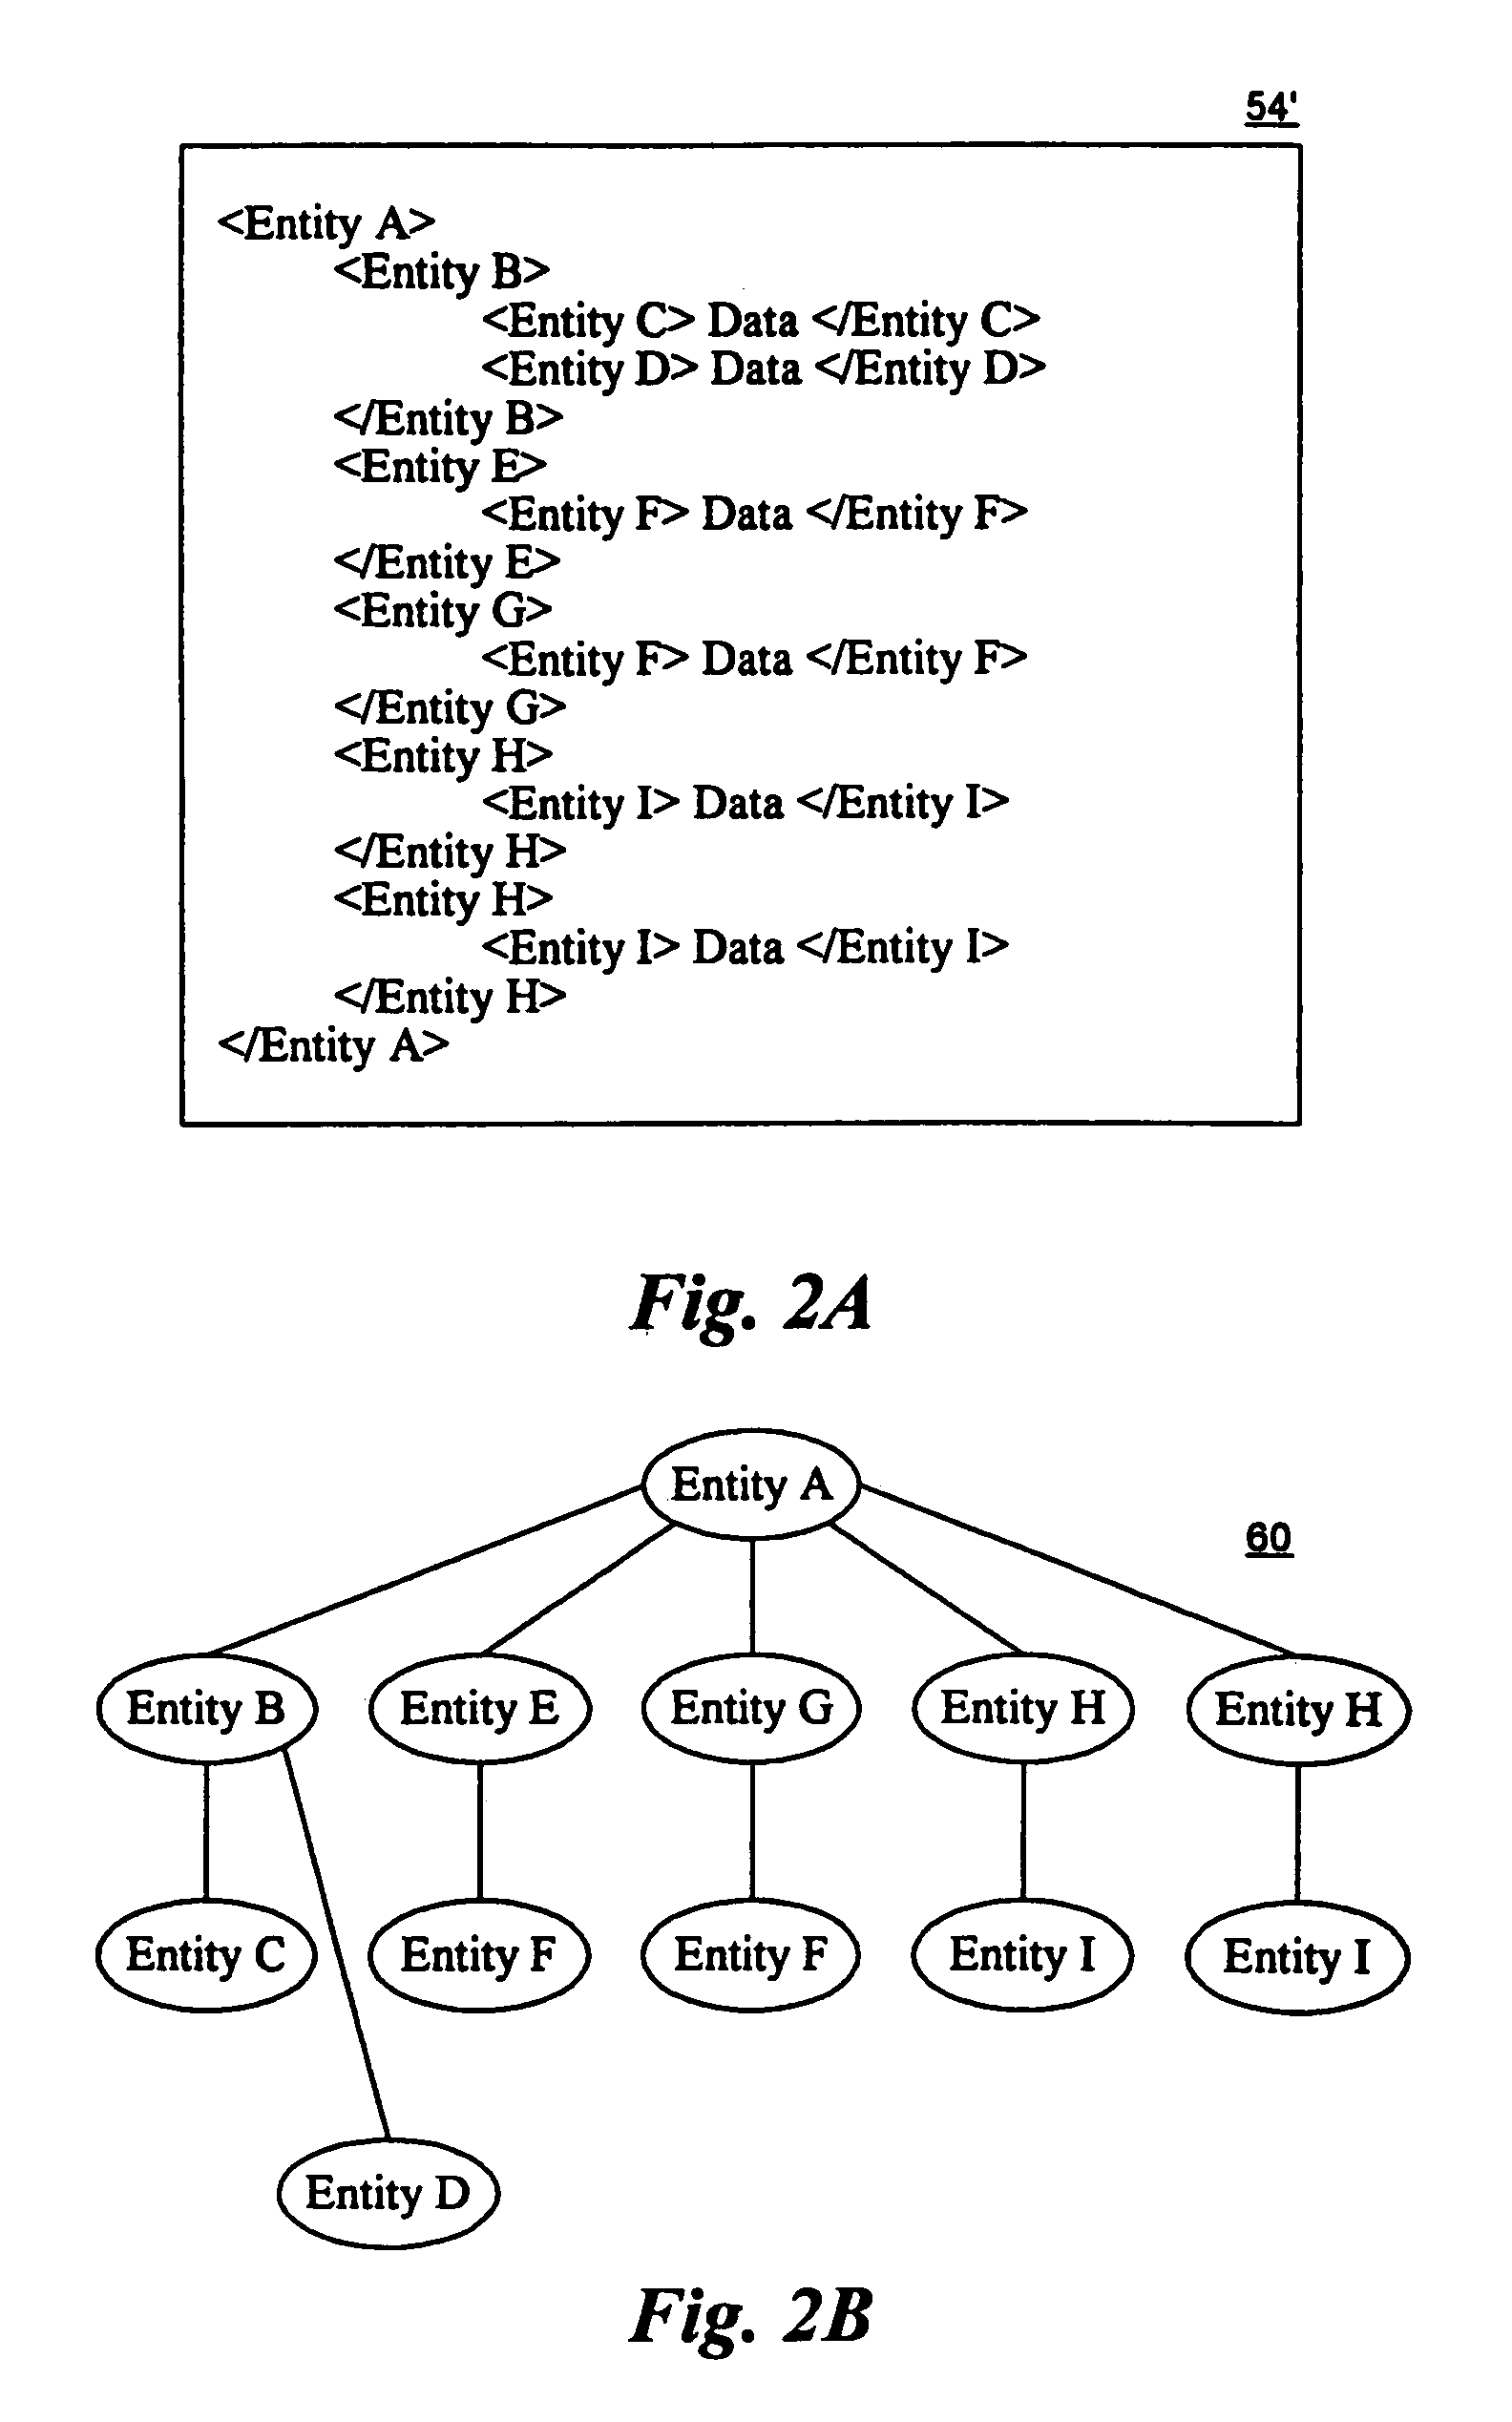 Method and apparatus for storing semi-structured data in a structured manner